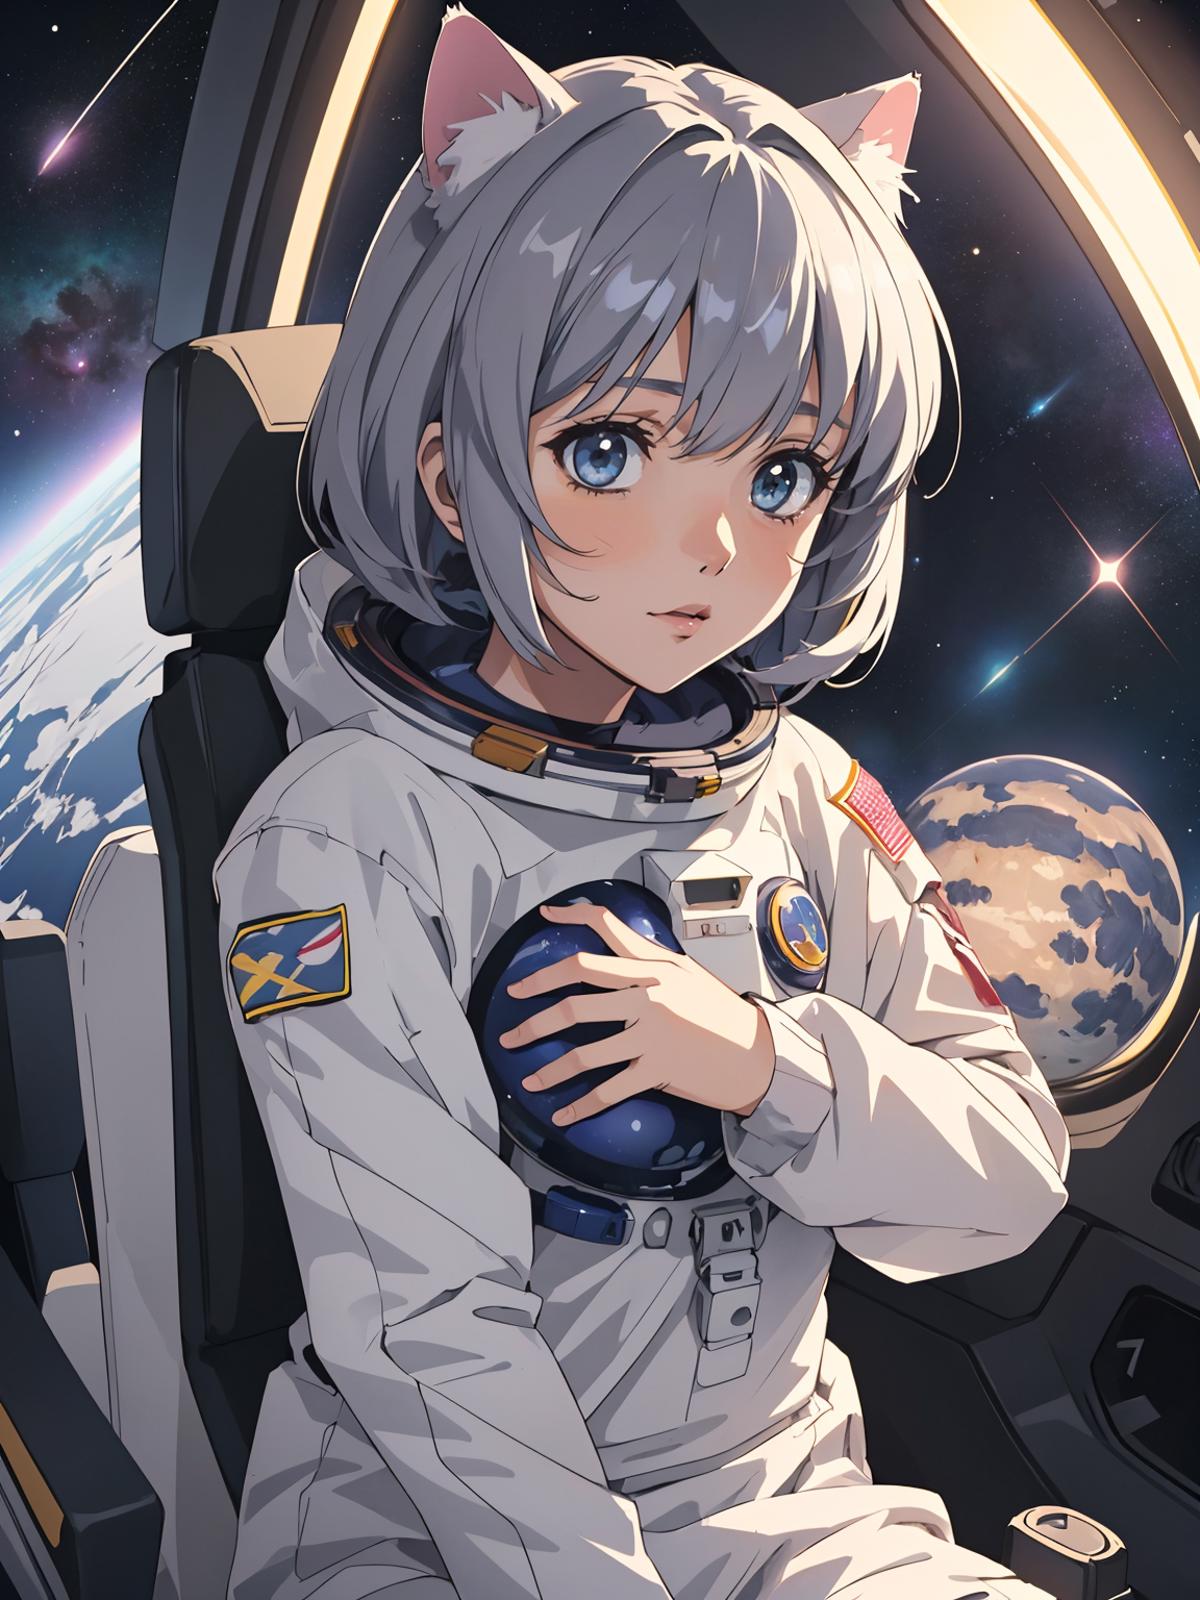 Anime girl in a space suit holding a blue ball.